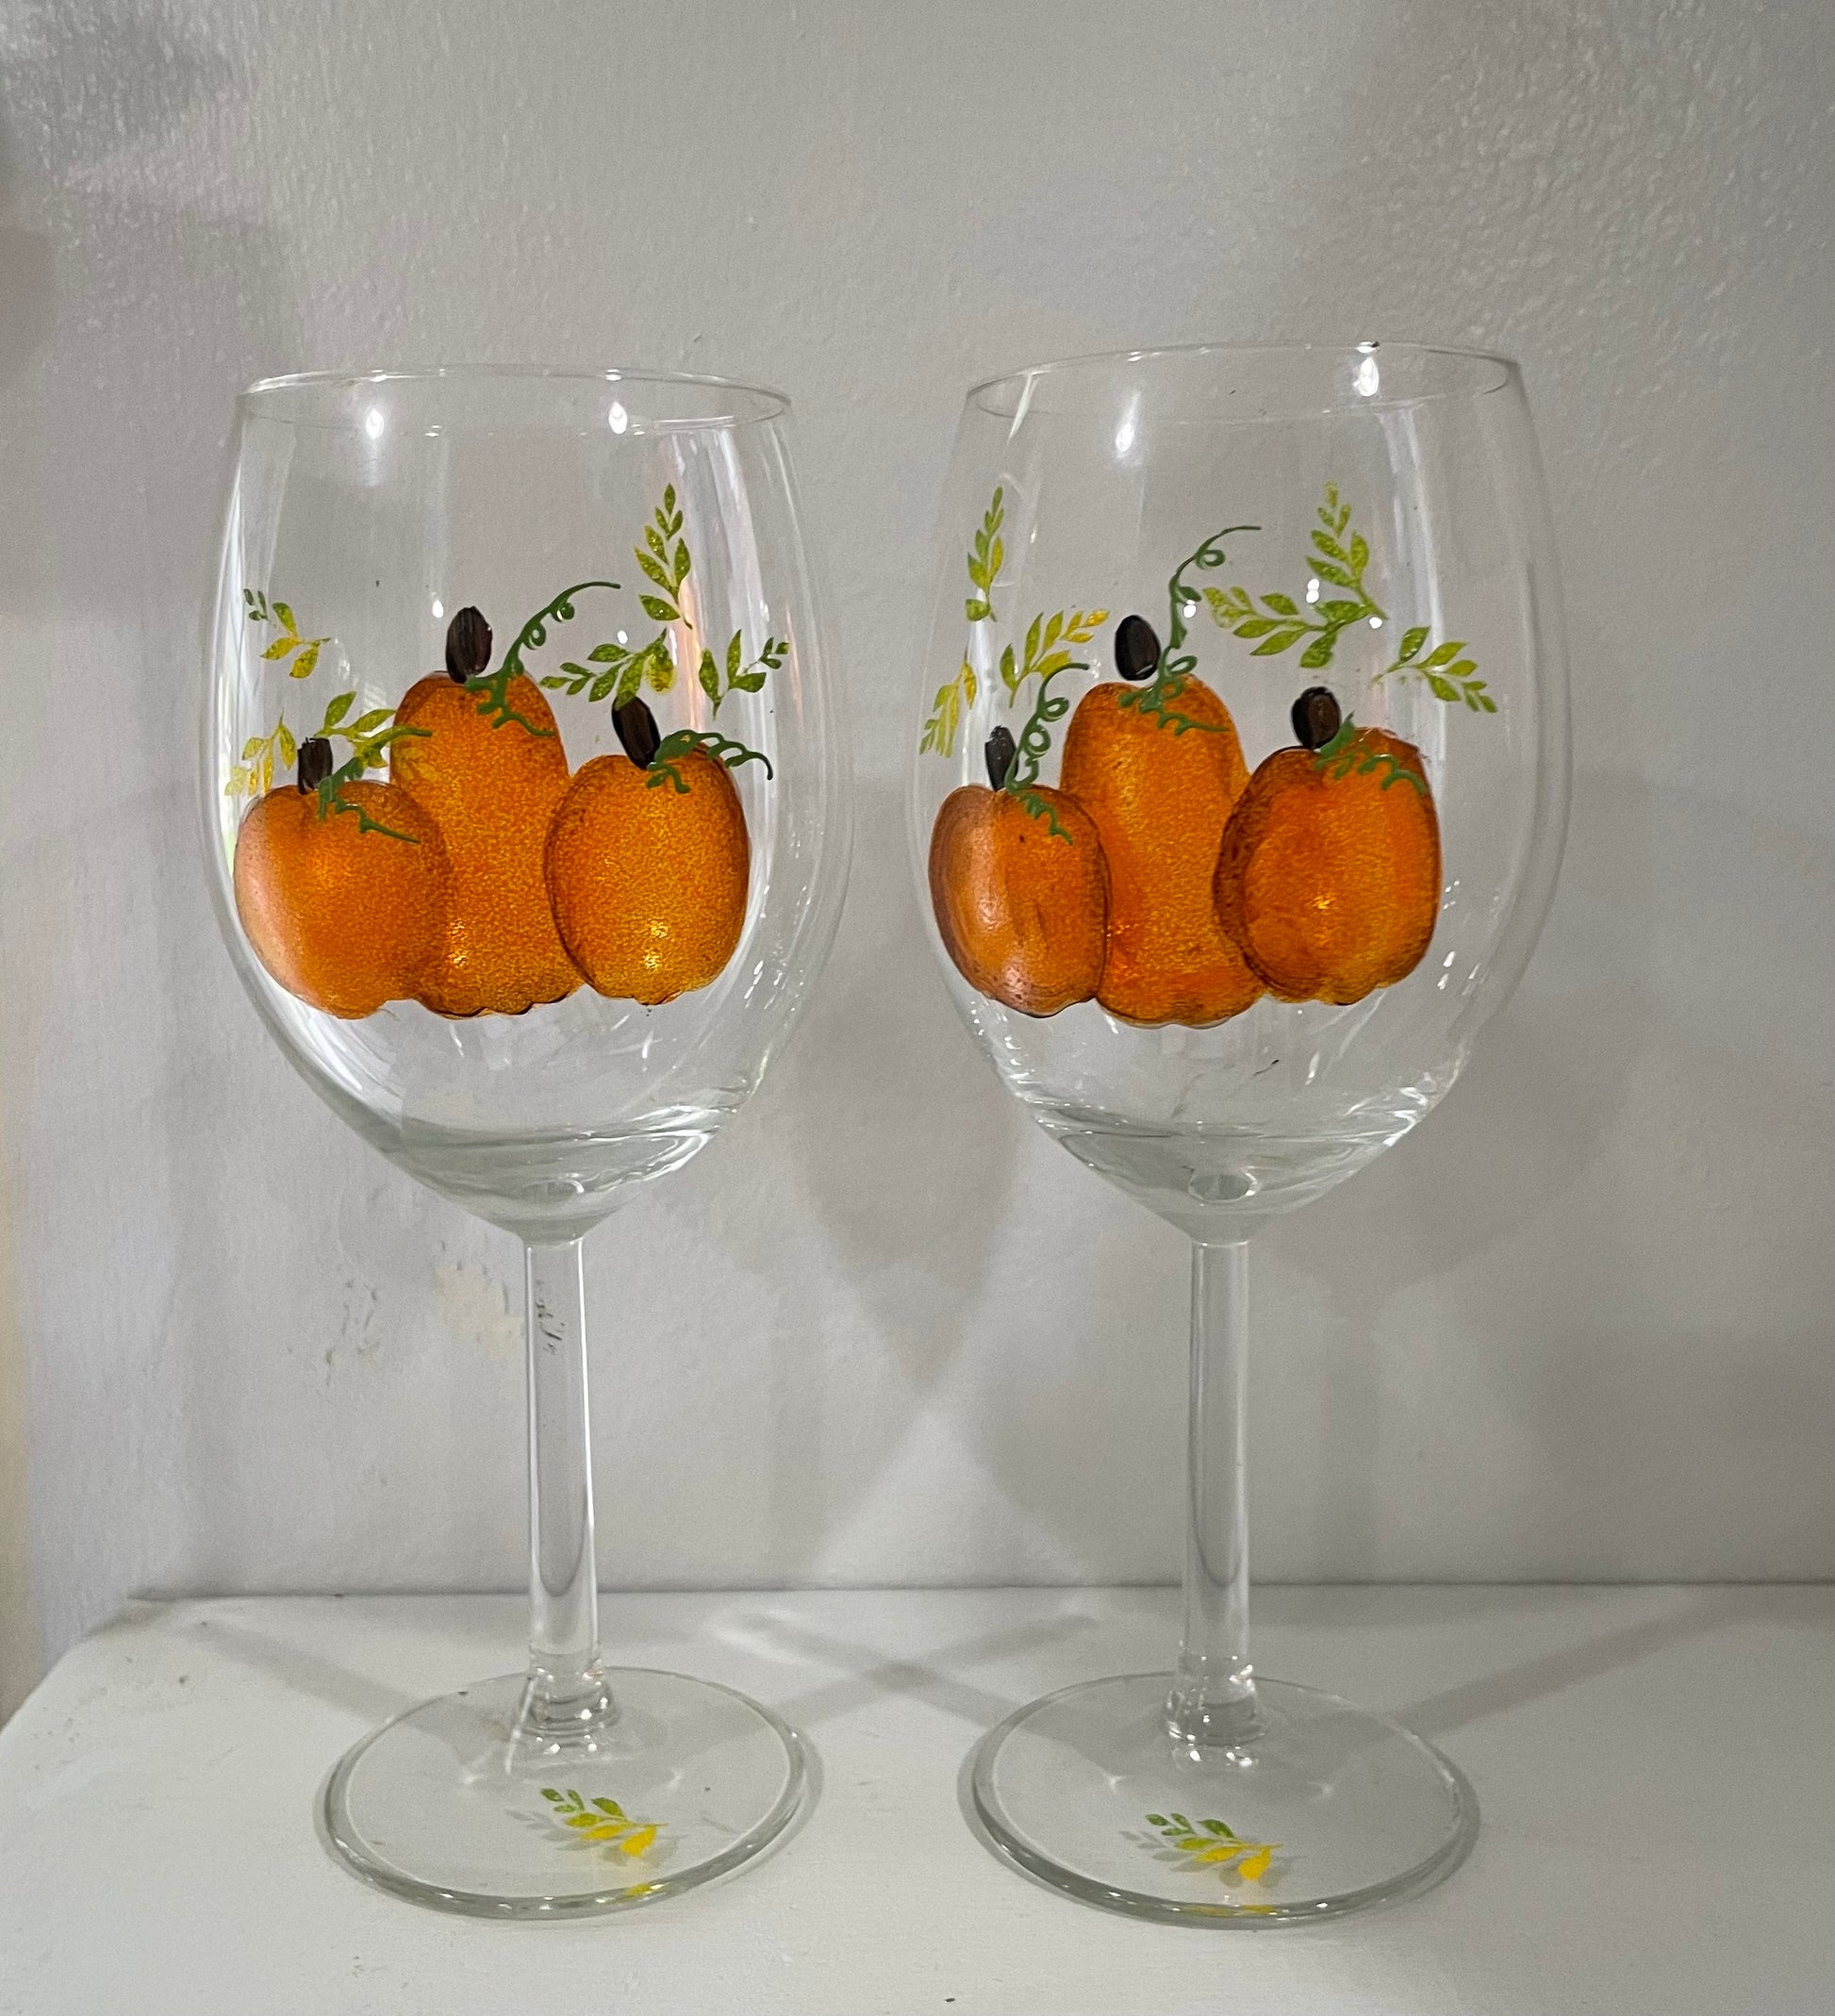 Set of 4 Wine Glass with three bright pumpkins two sizes Thanksgiving, Fall decor